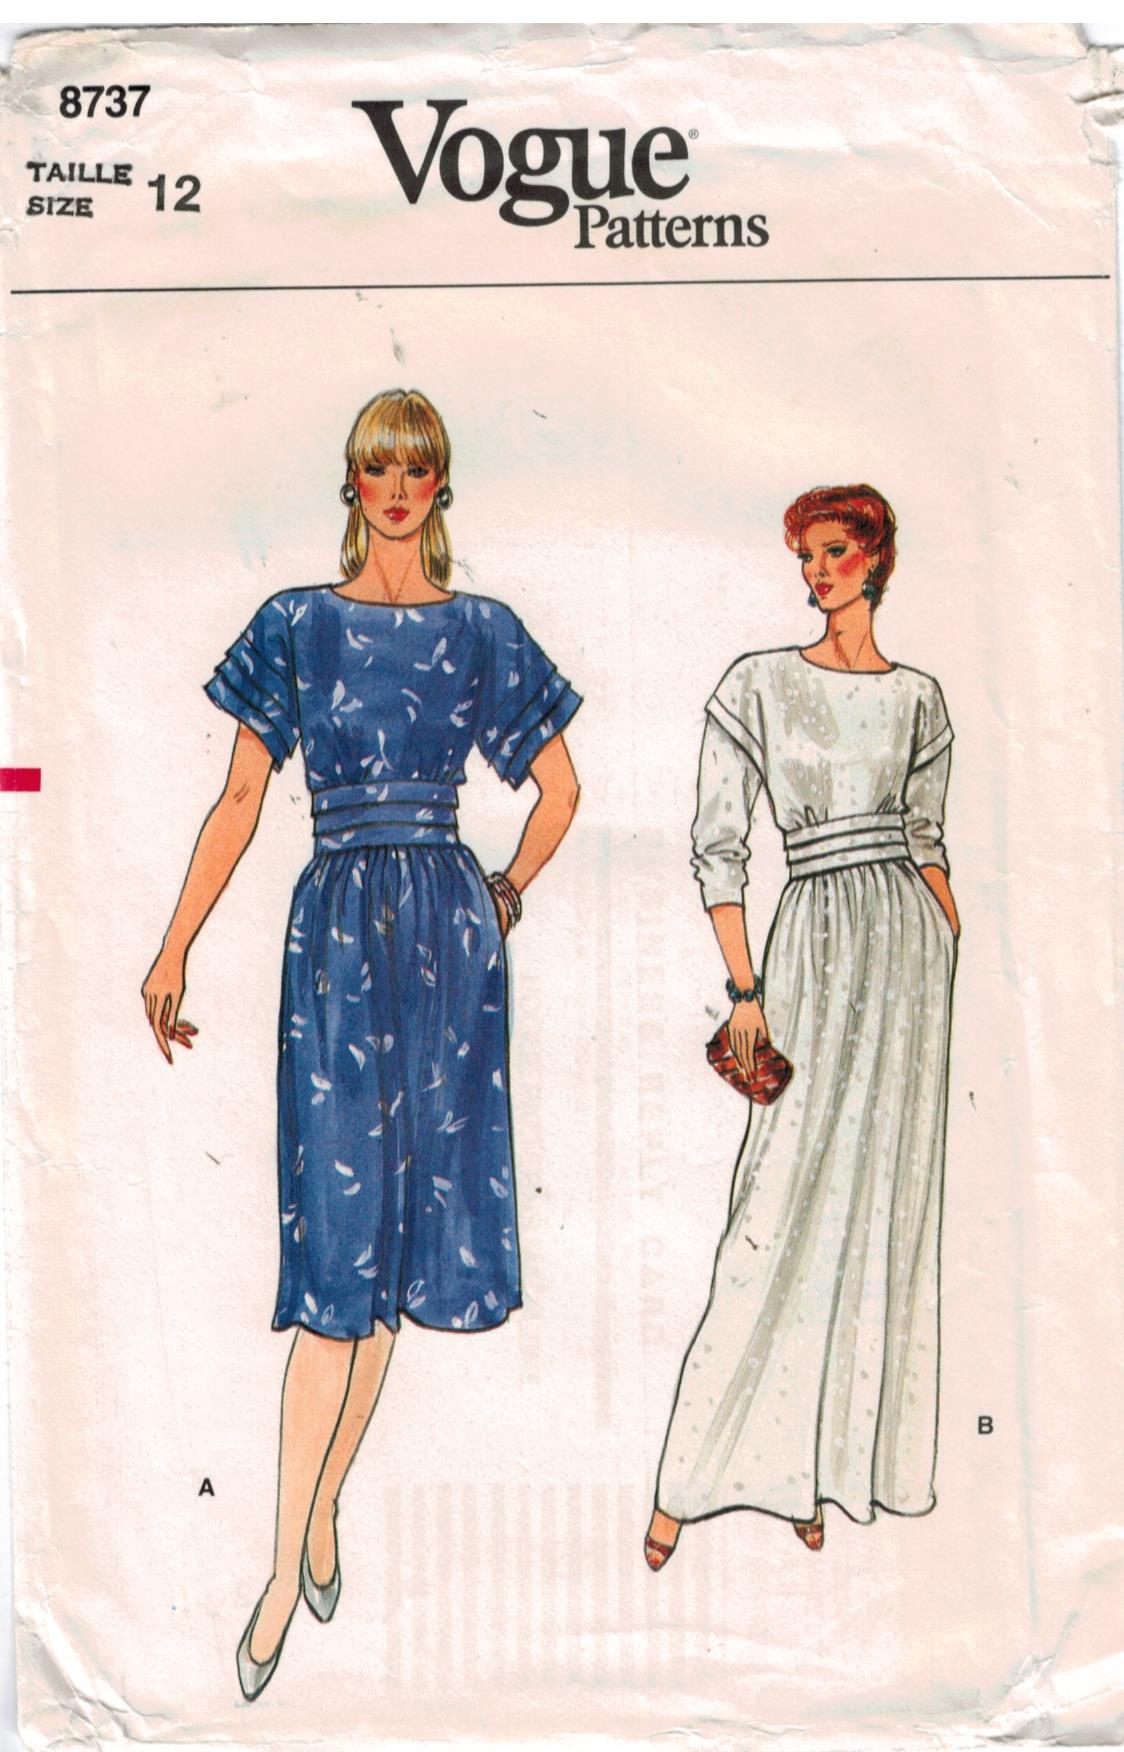 40+ vogue pattern 3133 how to sew the pleat